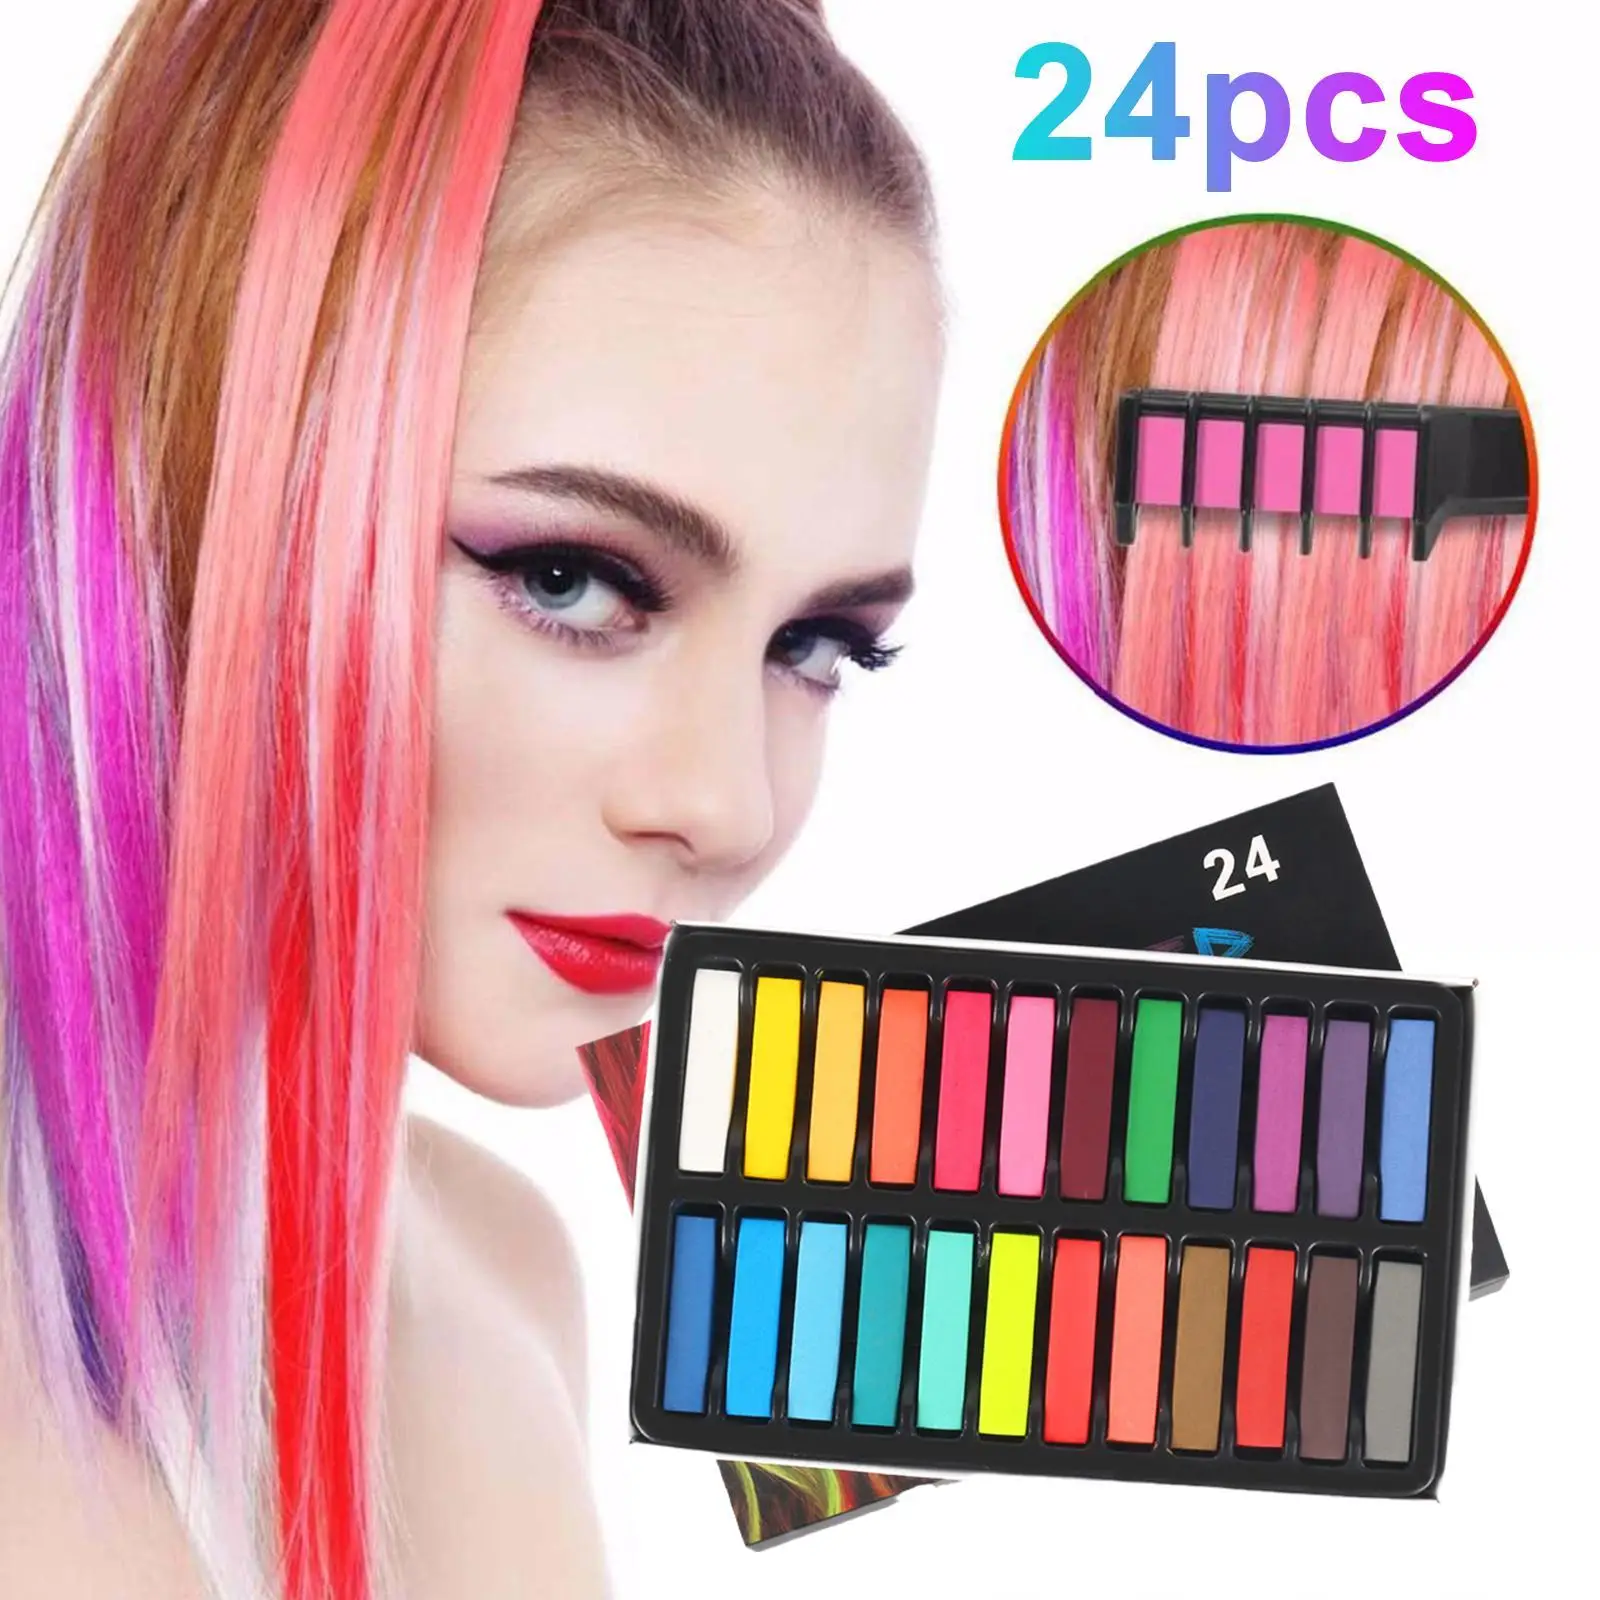 

24 Colors Hair Chalk Safe Non-toxic Temporary Hair Color Chalk Dye Pastel Stick Party Cosplay Fashion Styling Hair Dyeing Tool